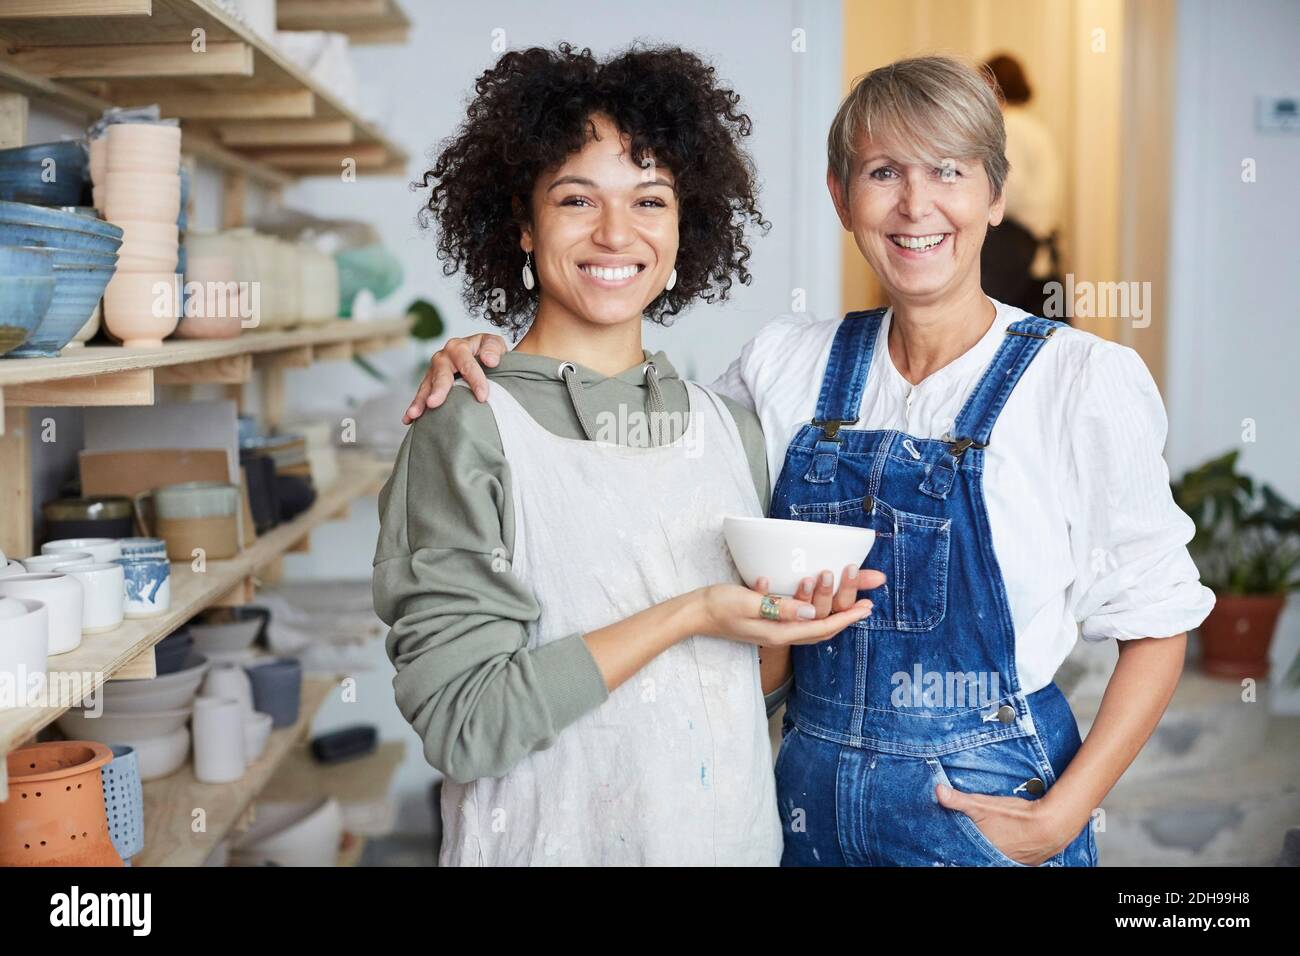 Portrait of smiling females with bowl in pottery class Stock Photo